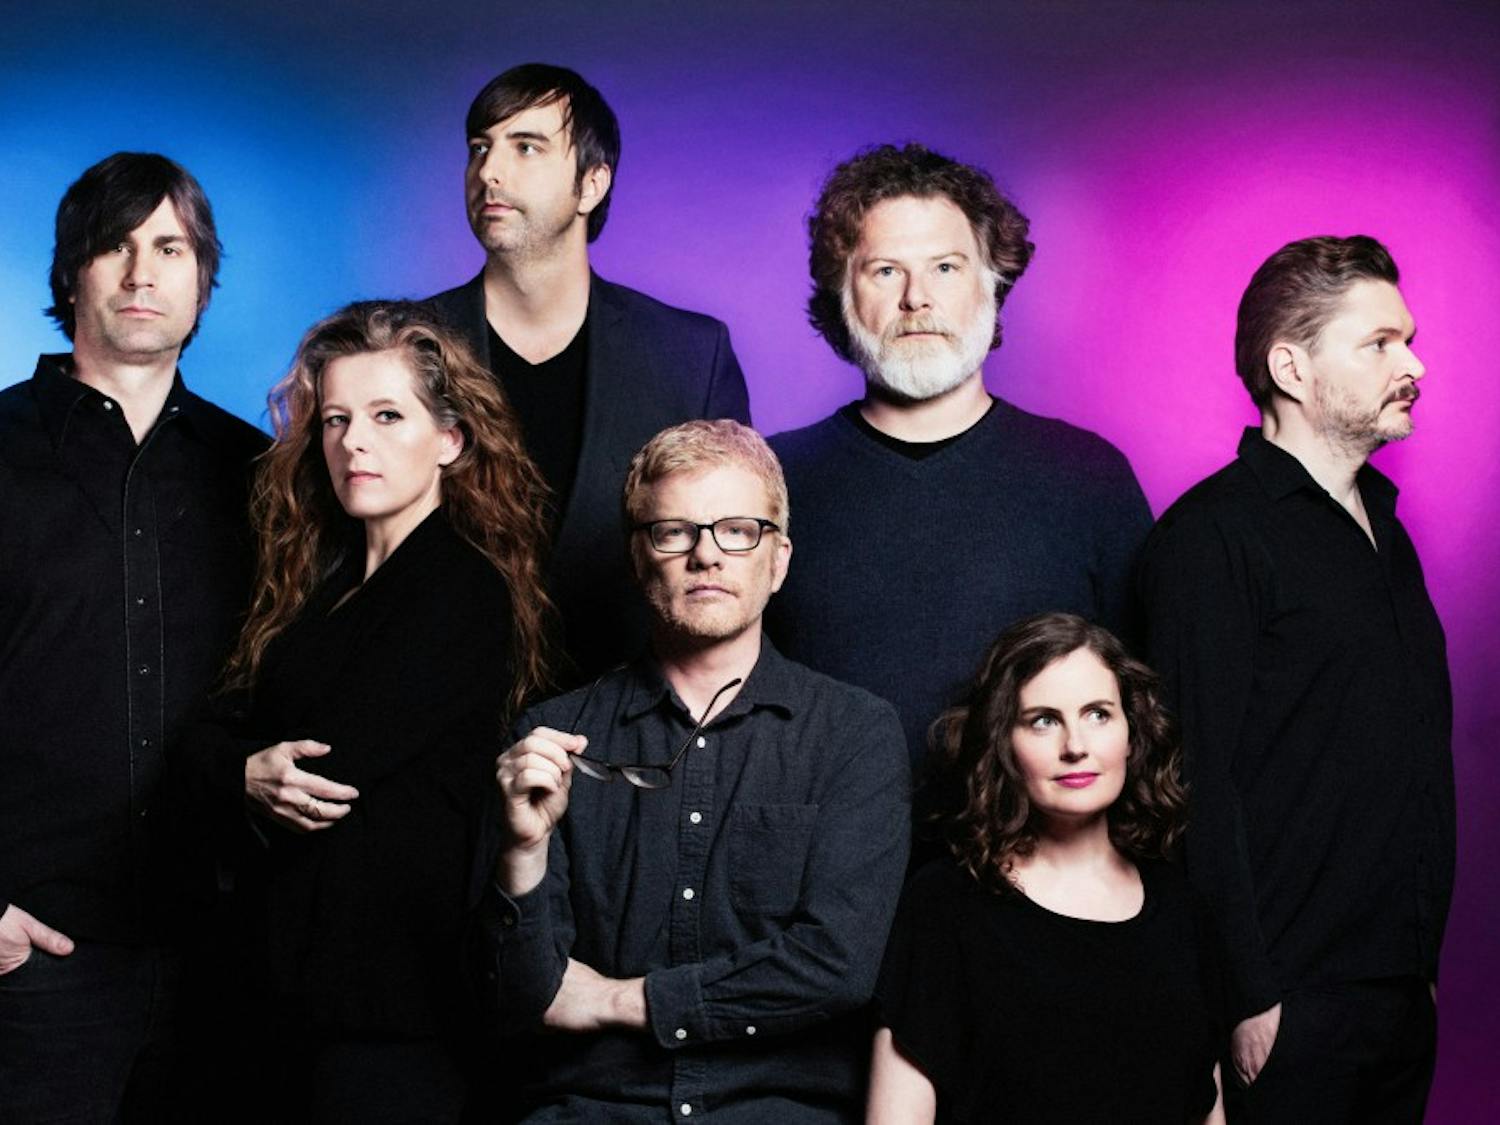 Carl Newman, front center, and The New Pornographers just released their seventh album "Whiteout Conditions."